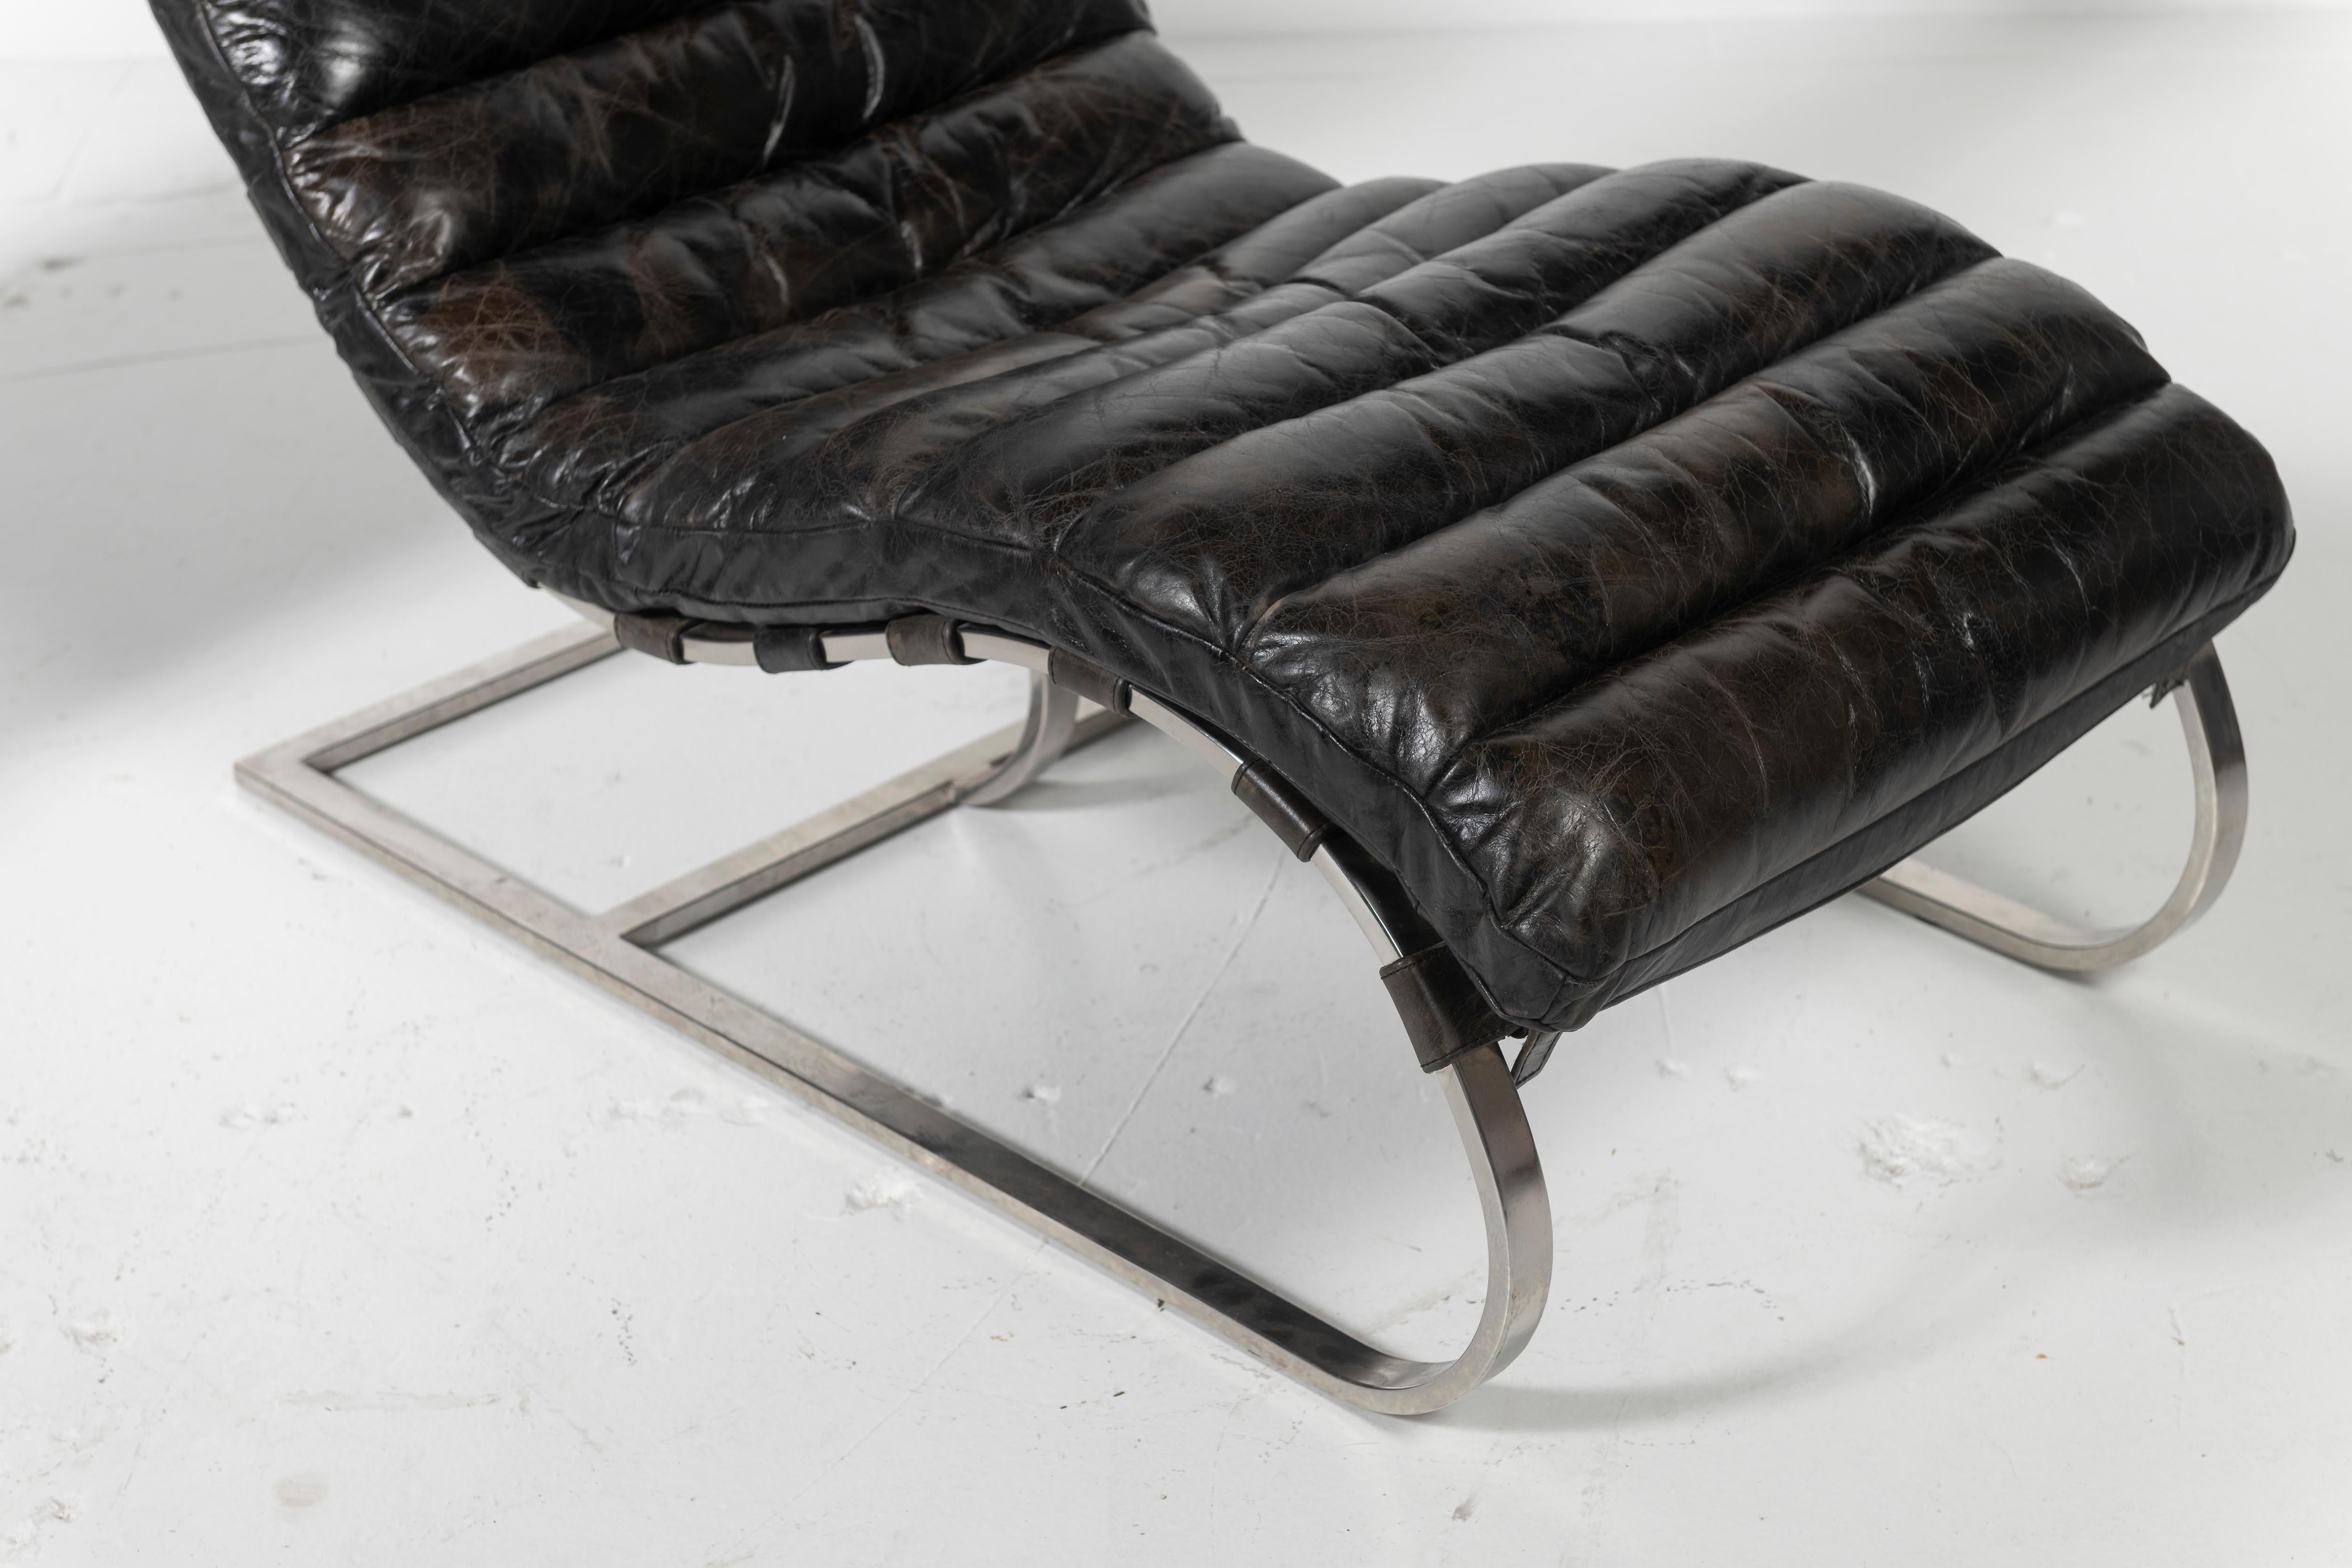 Pair of Vintage Michel Boyer Chromed Steel & Black Leather Chaise Lounge Chairs For Sale 1